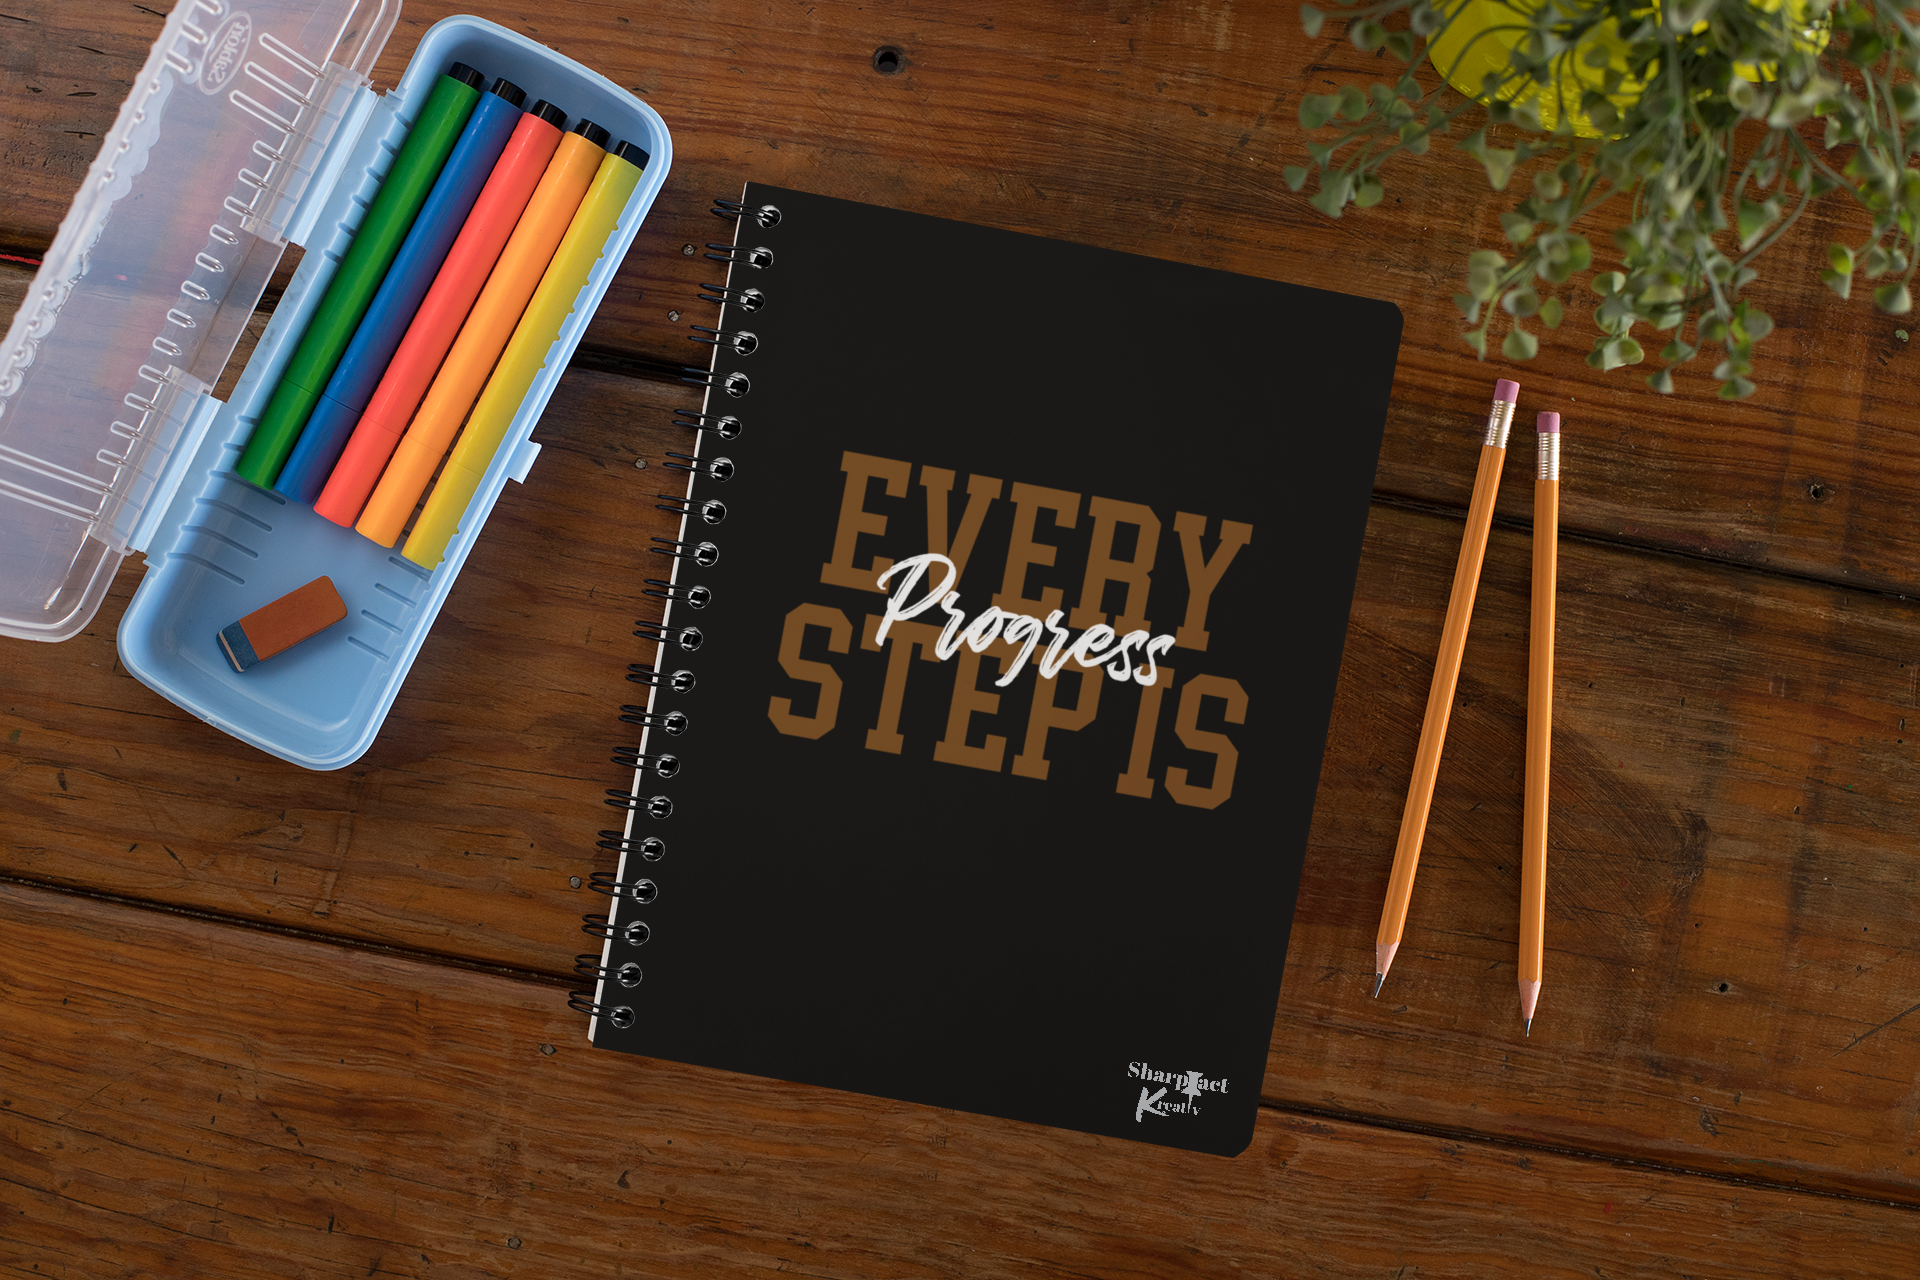 Every Step is Progress Notebook is a Sharp Tact Kreativ | Tees & Gifts with Encouraging Messages to Brighten Your Day with a Bit of Wit notebook on a wooden table.